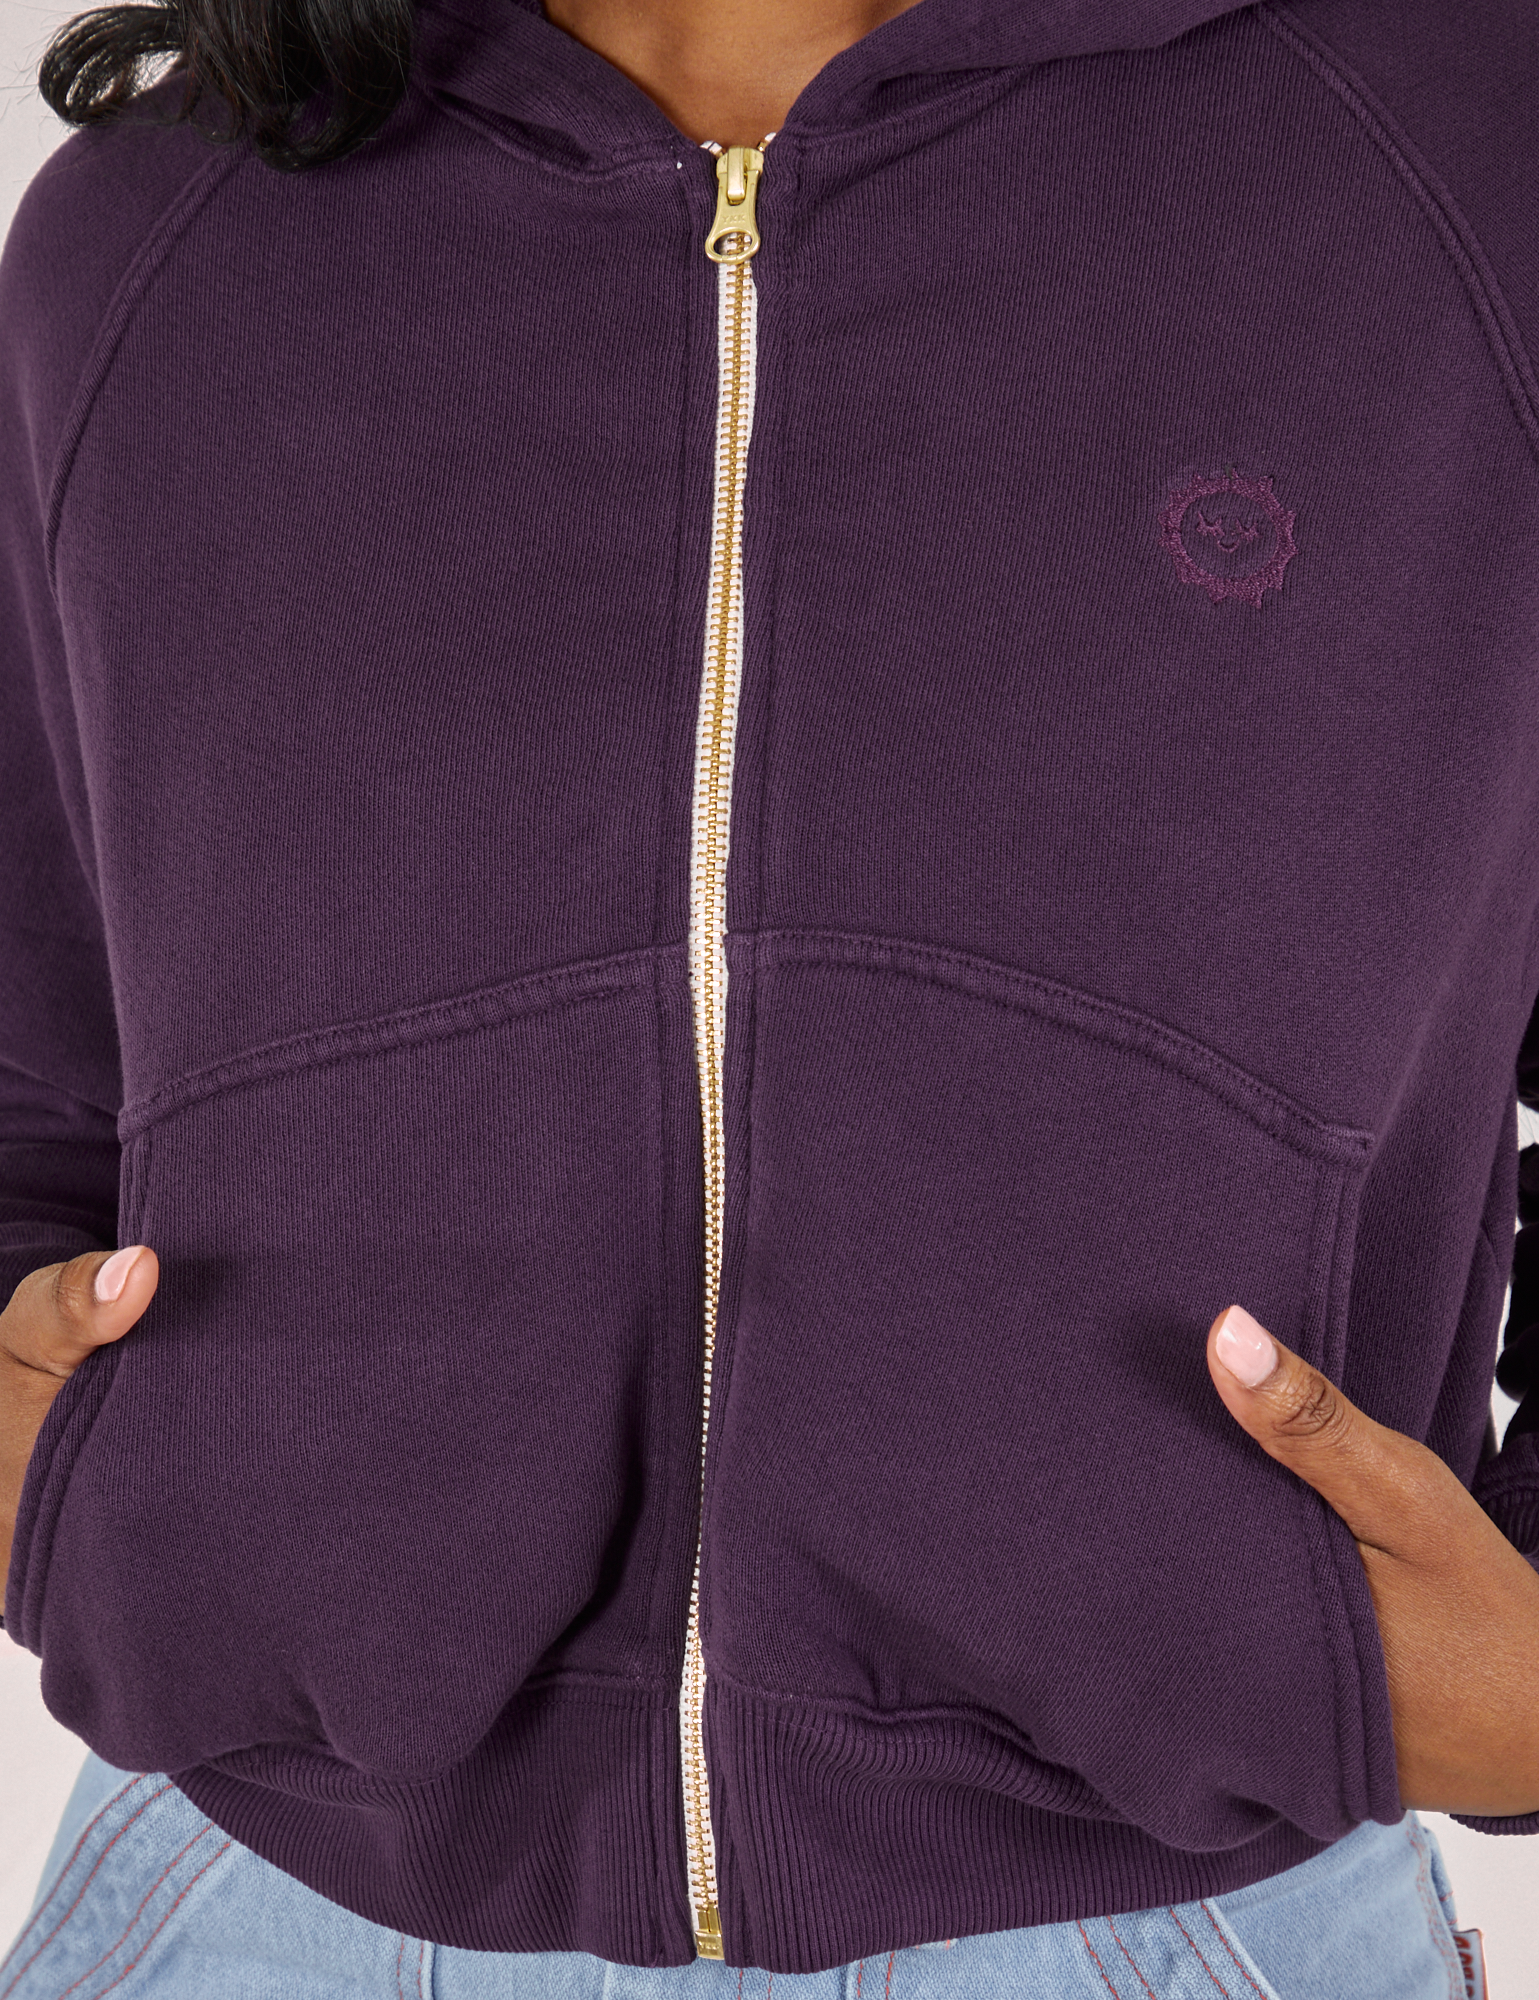 Cropped Zip Hoodie in Nebula Purple front close up on Kandia